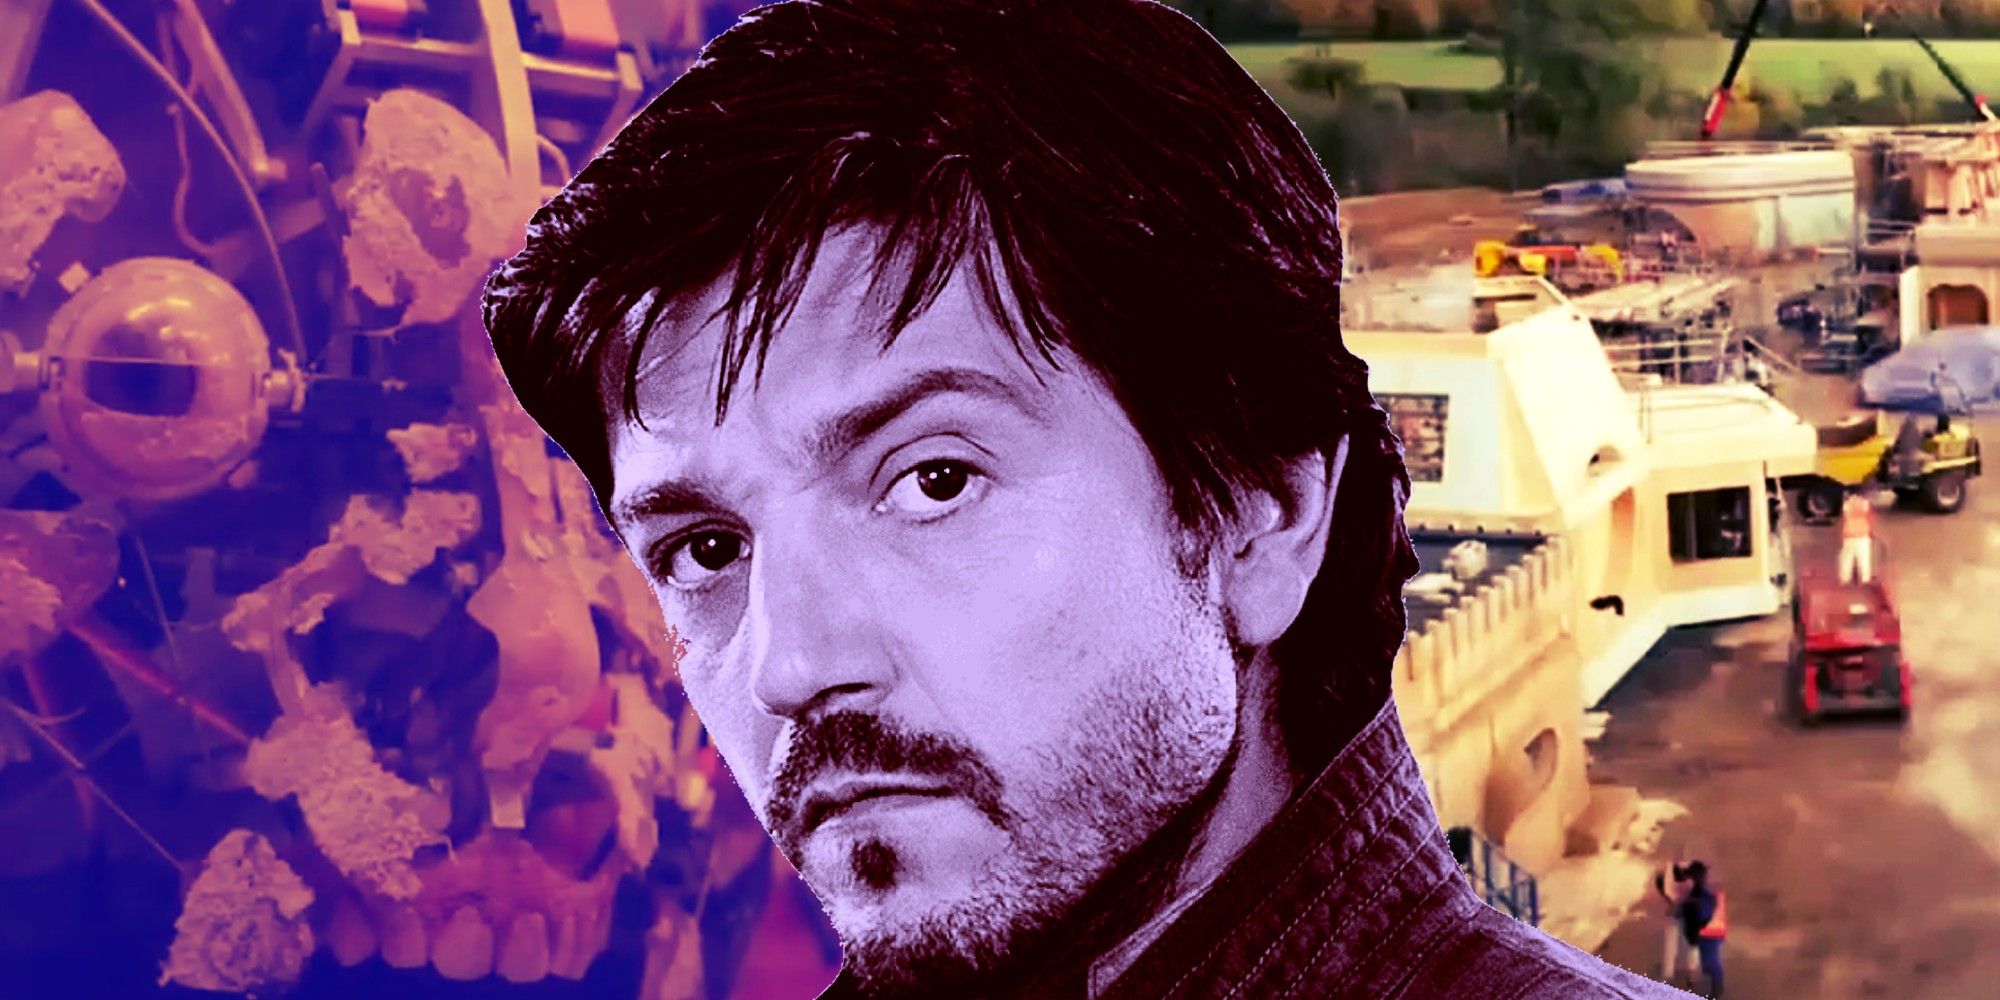 Collage of set construction, practical effects, and Diego Luna as Cassian Andor in Star Wars: Andor